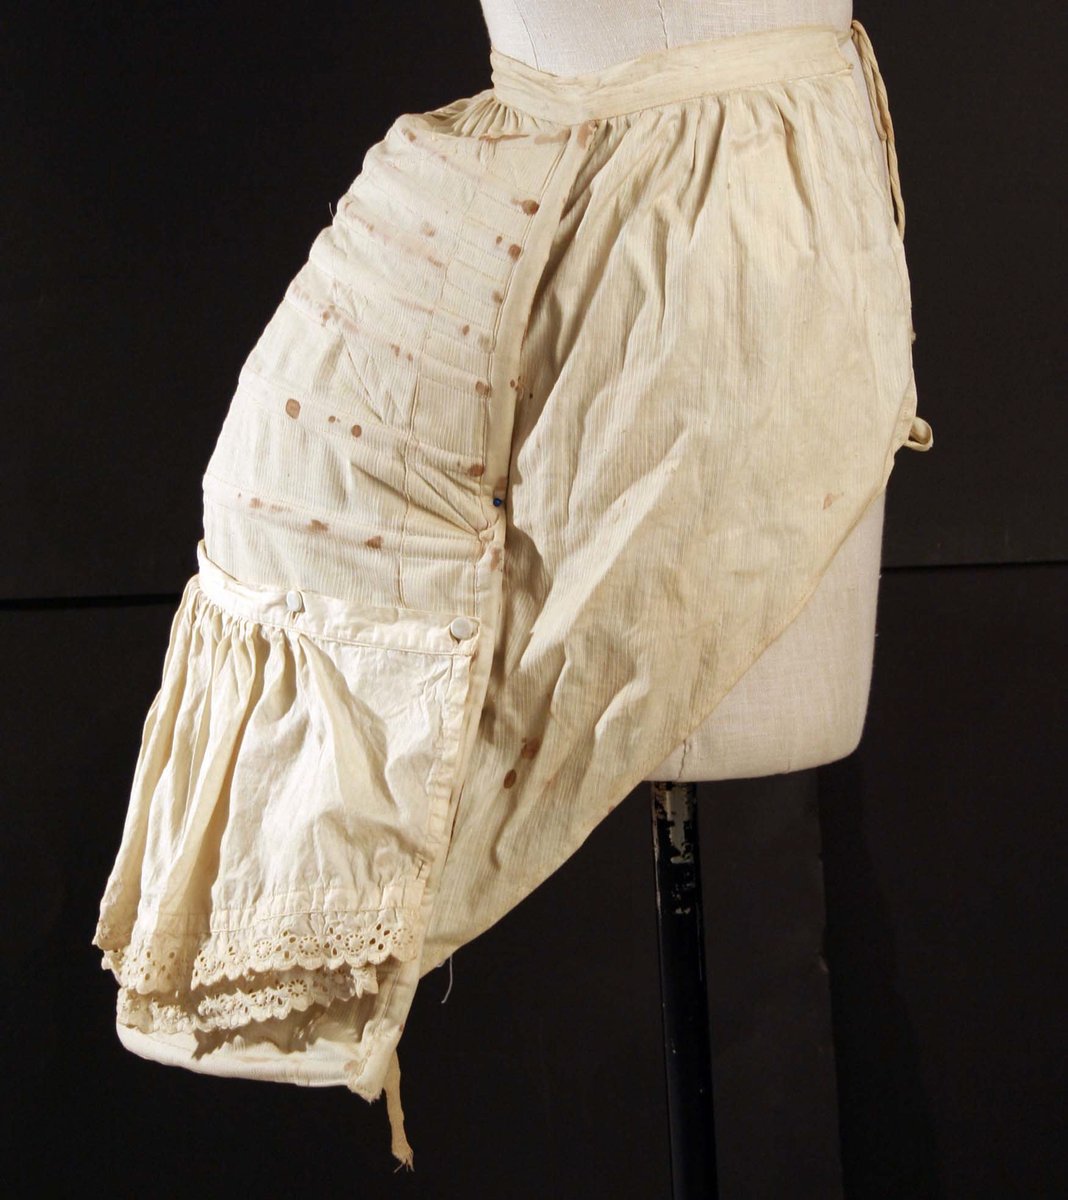 A bustle is a padded undergarment used to add fullness, or support the drapery at the back of women's dresses.